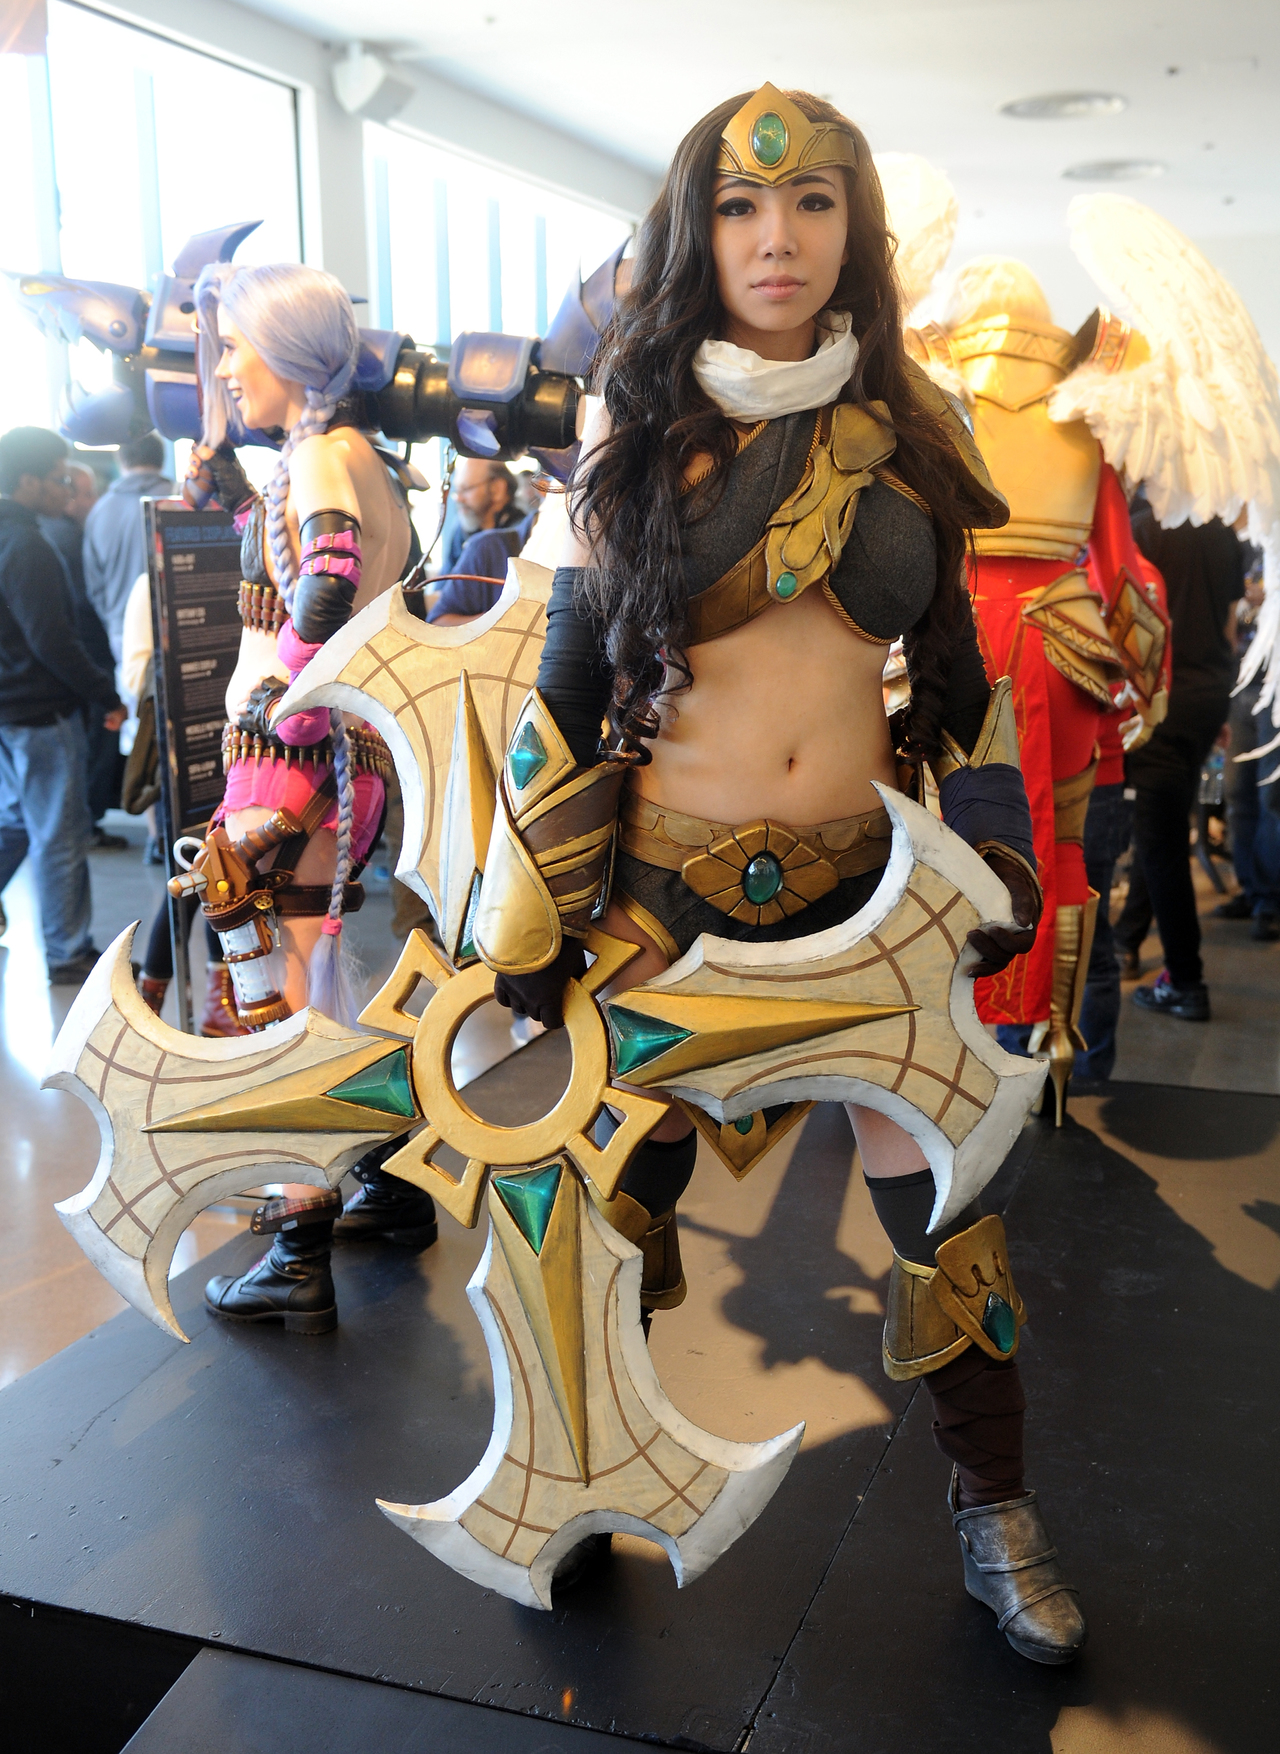 LEAGUE OF LEGENDS Cosplayer